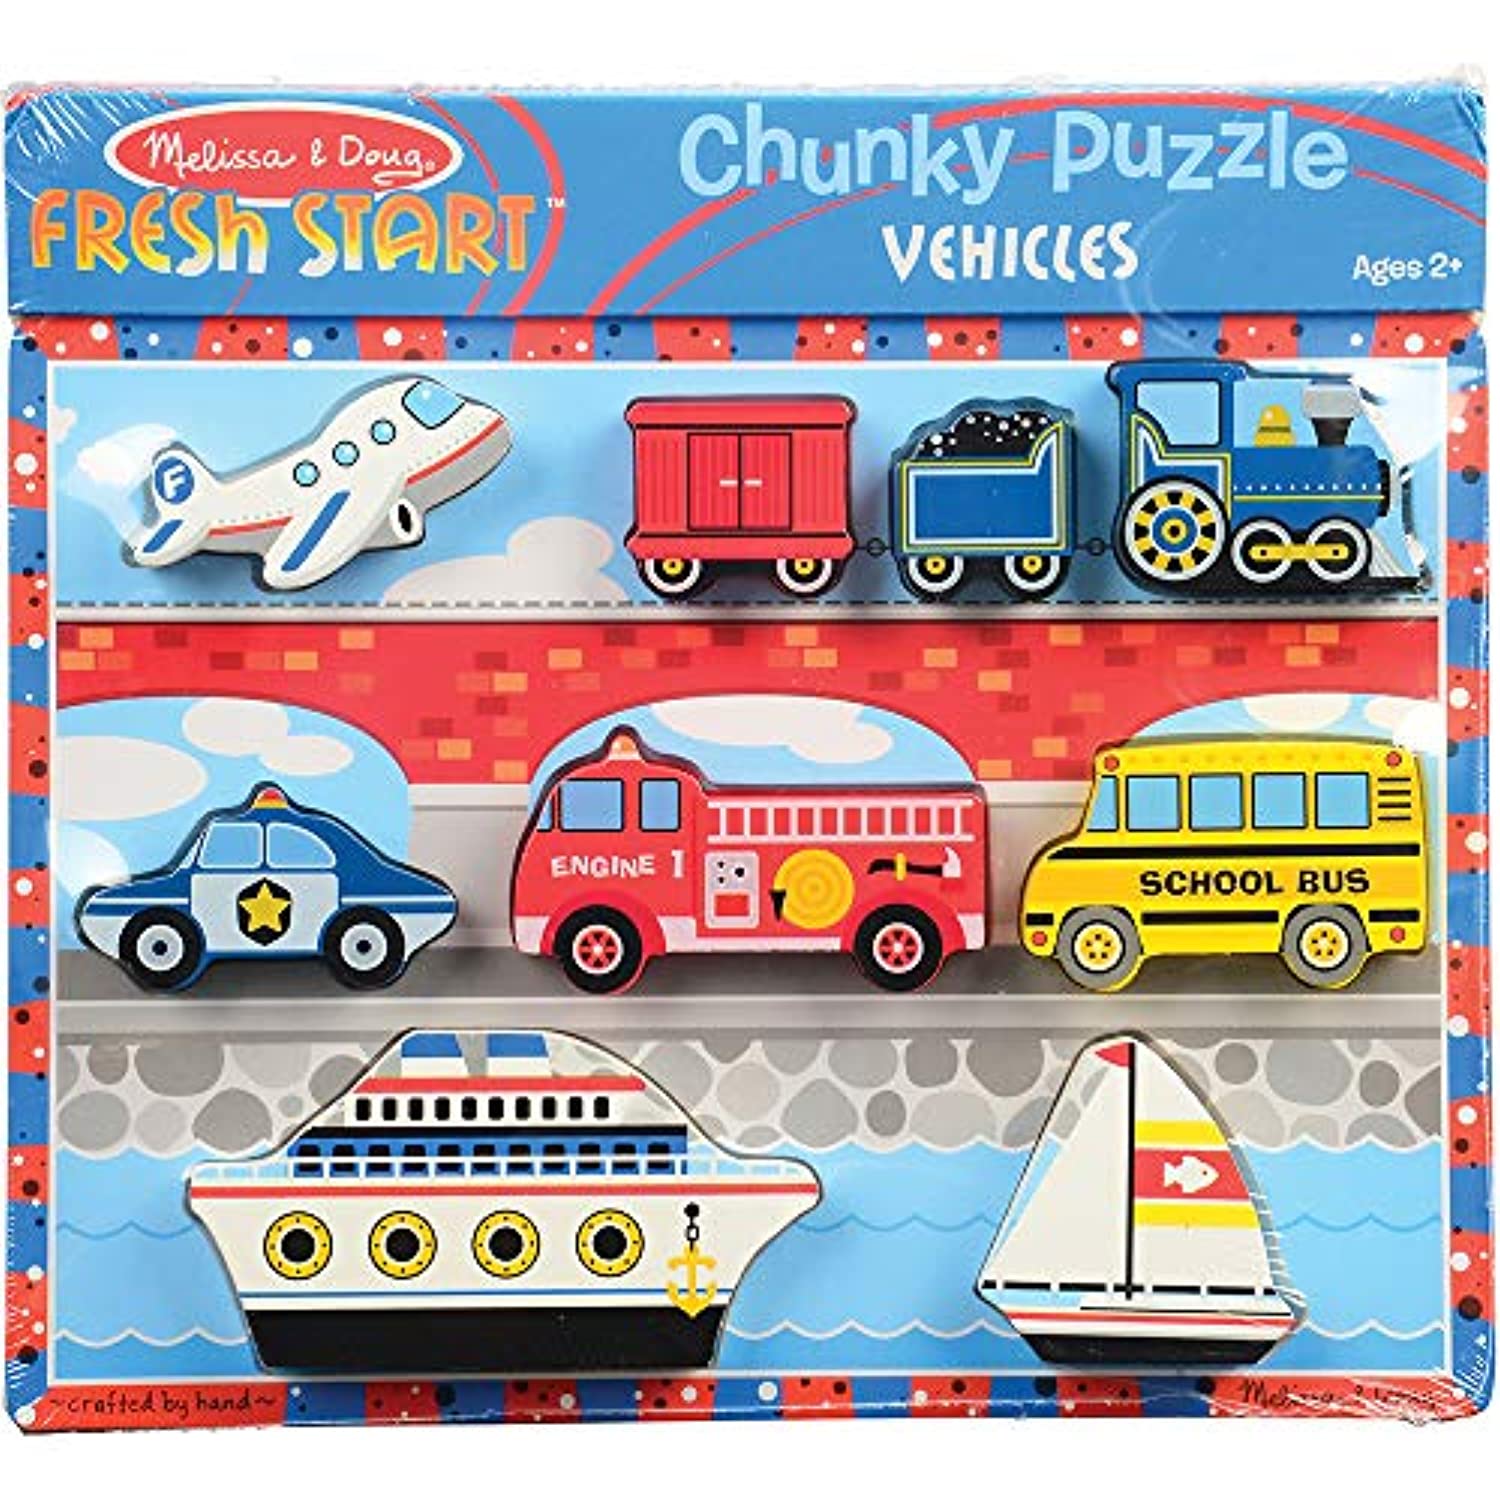 Constructive Playthings LIC-4 Set of Four 12" x 9" Wood Chunky Scene Melissa & Doug Puzzles with Pieces That Stand for Additional Play for Ages 2 Years and Up